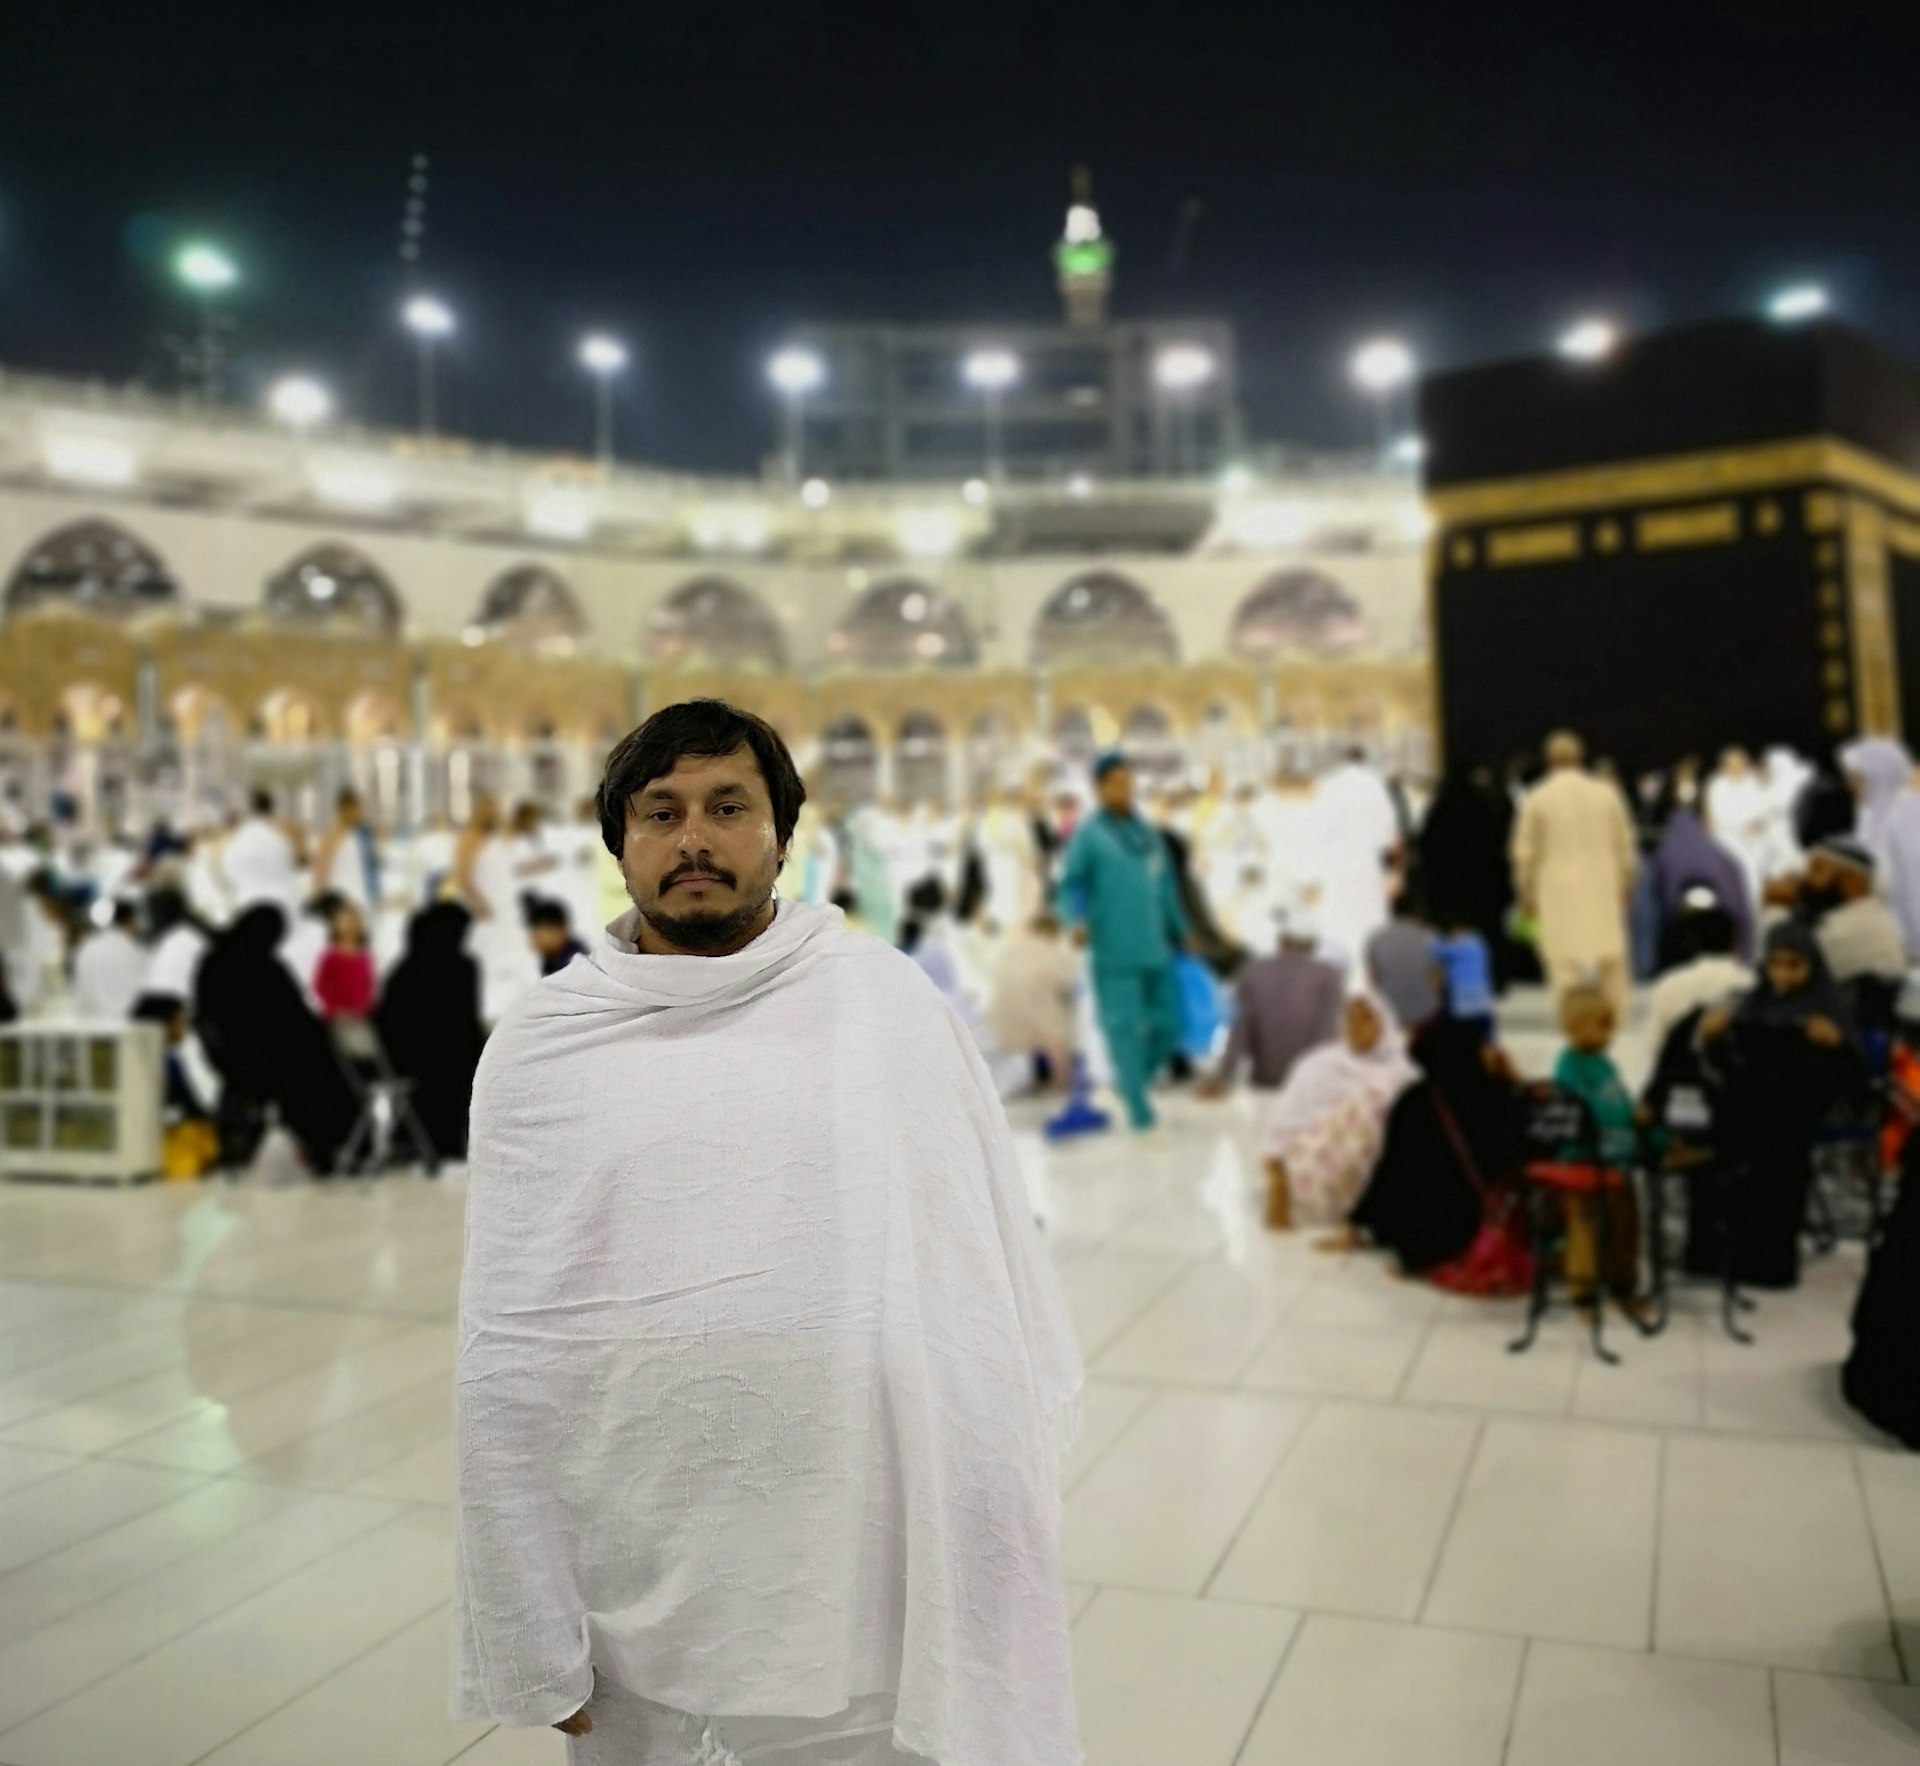 A man in white robe stands facing the camera in front of the Kaaba in The Great Mosque in Mecca. A large group of pilgrims are in the background behind him, sitting, standing and talking.